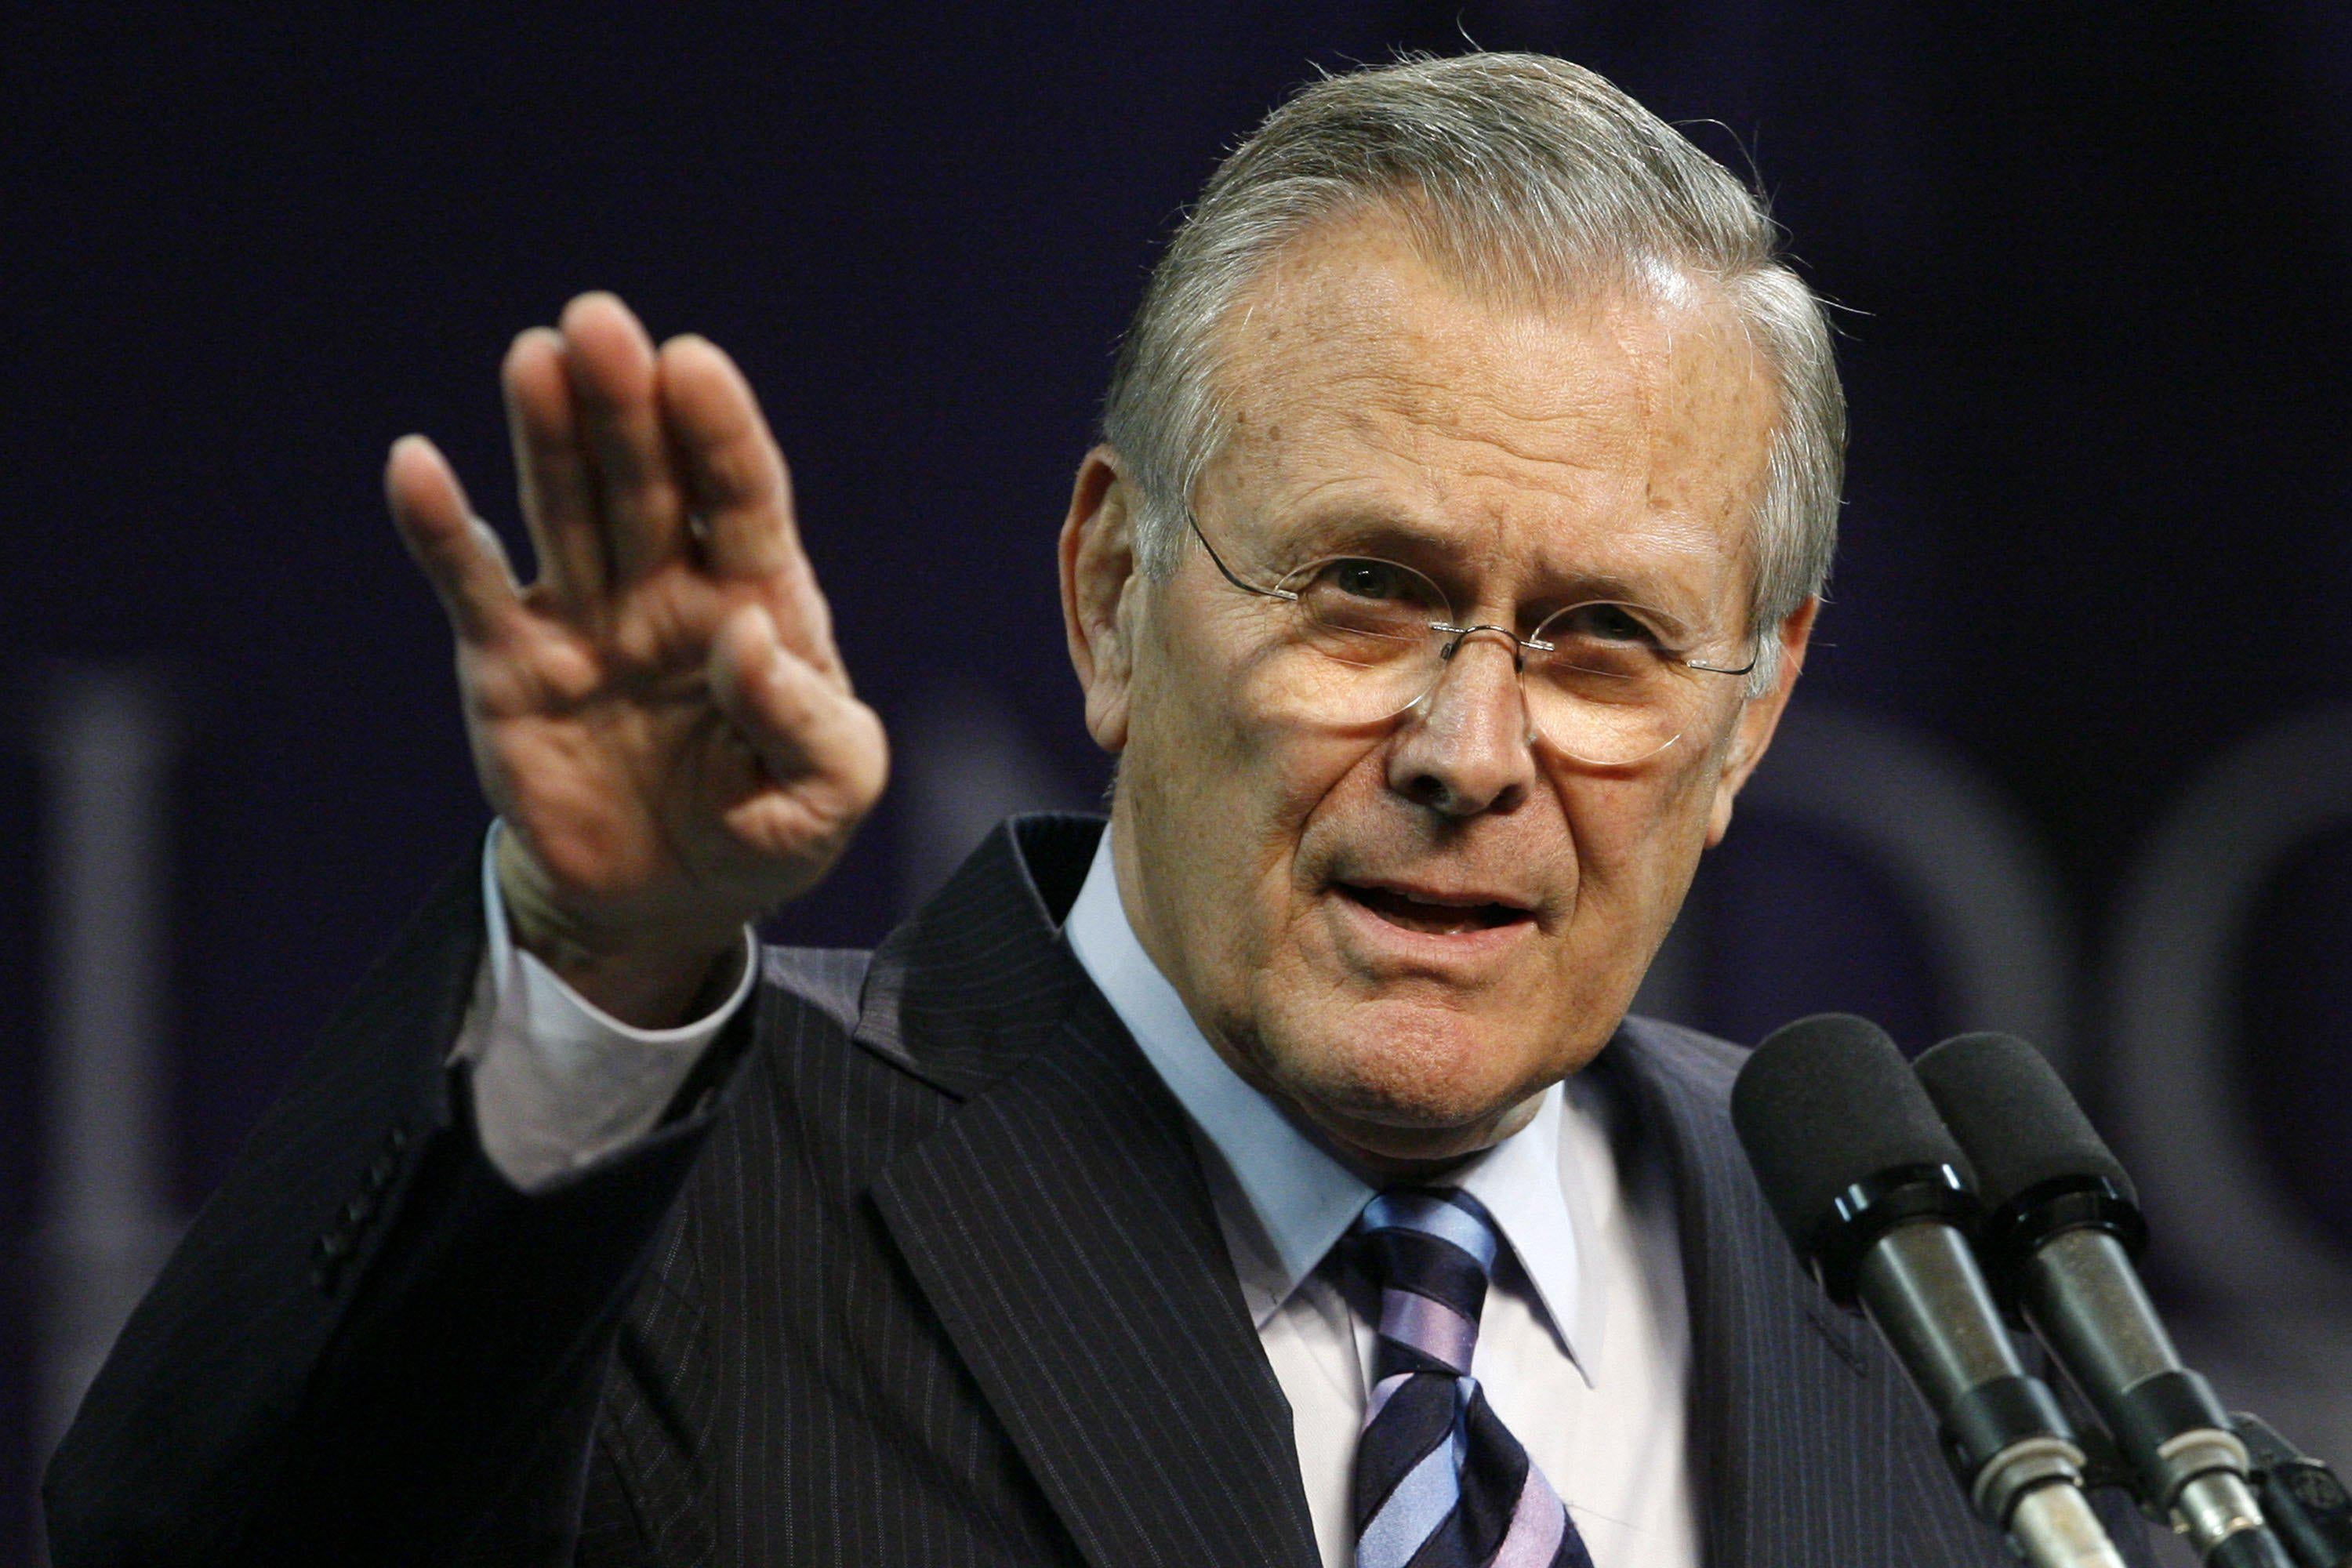 MANHATTAN, KS - NOVEMBER 9:  Outgoing U.S. Defense Secretary Donald Rumsfeld delivers the 146th Landon Lecture inside Bramlage Coliseum at Kansas State University on November 09, 2006 in Manhattan, Kansas. Rumsfeld resigned as Defense Secretary the day before giving the lecture at Kansas State University and will be replaced, if confirmed, by former CIA Director Robert Gates.   (Photo by Larry W. Smith/Getty Images)